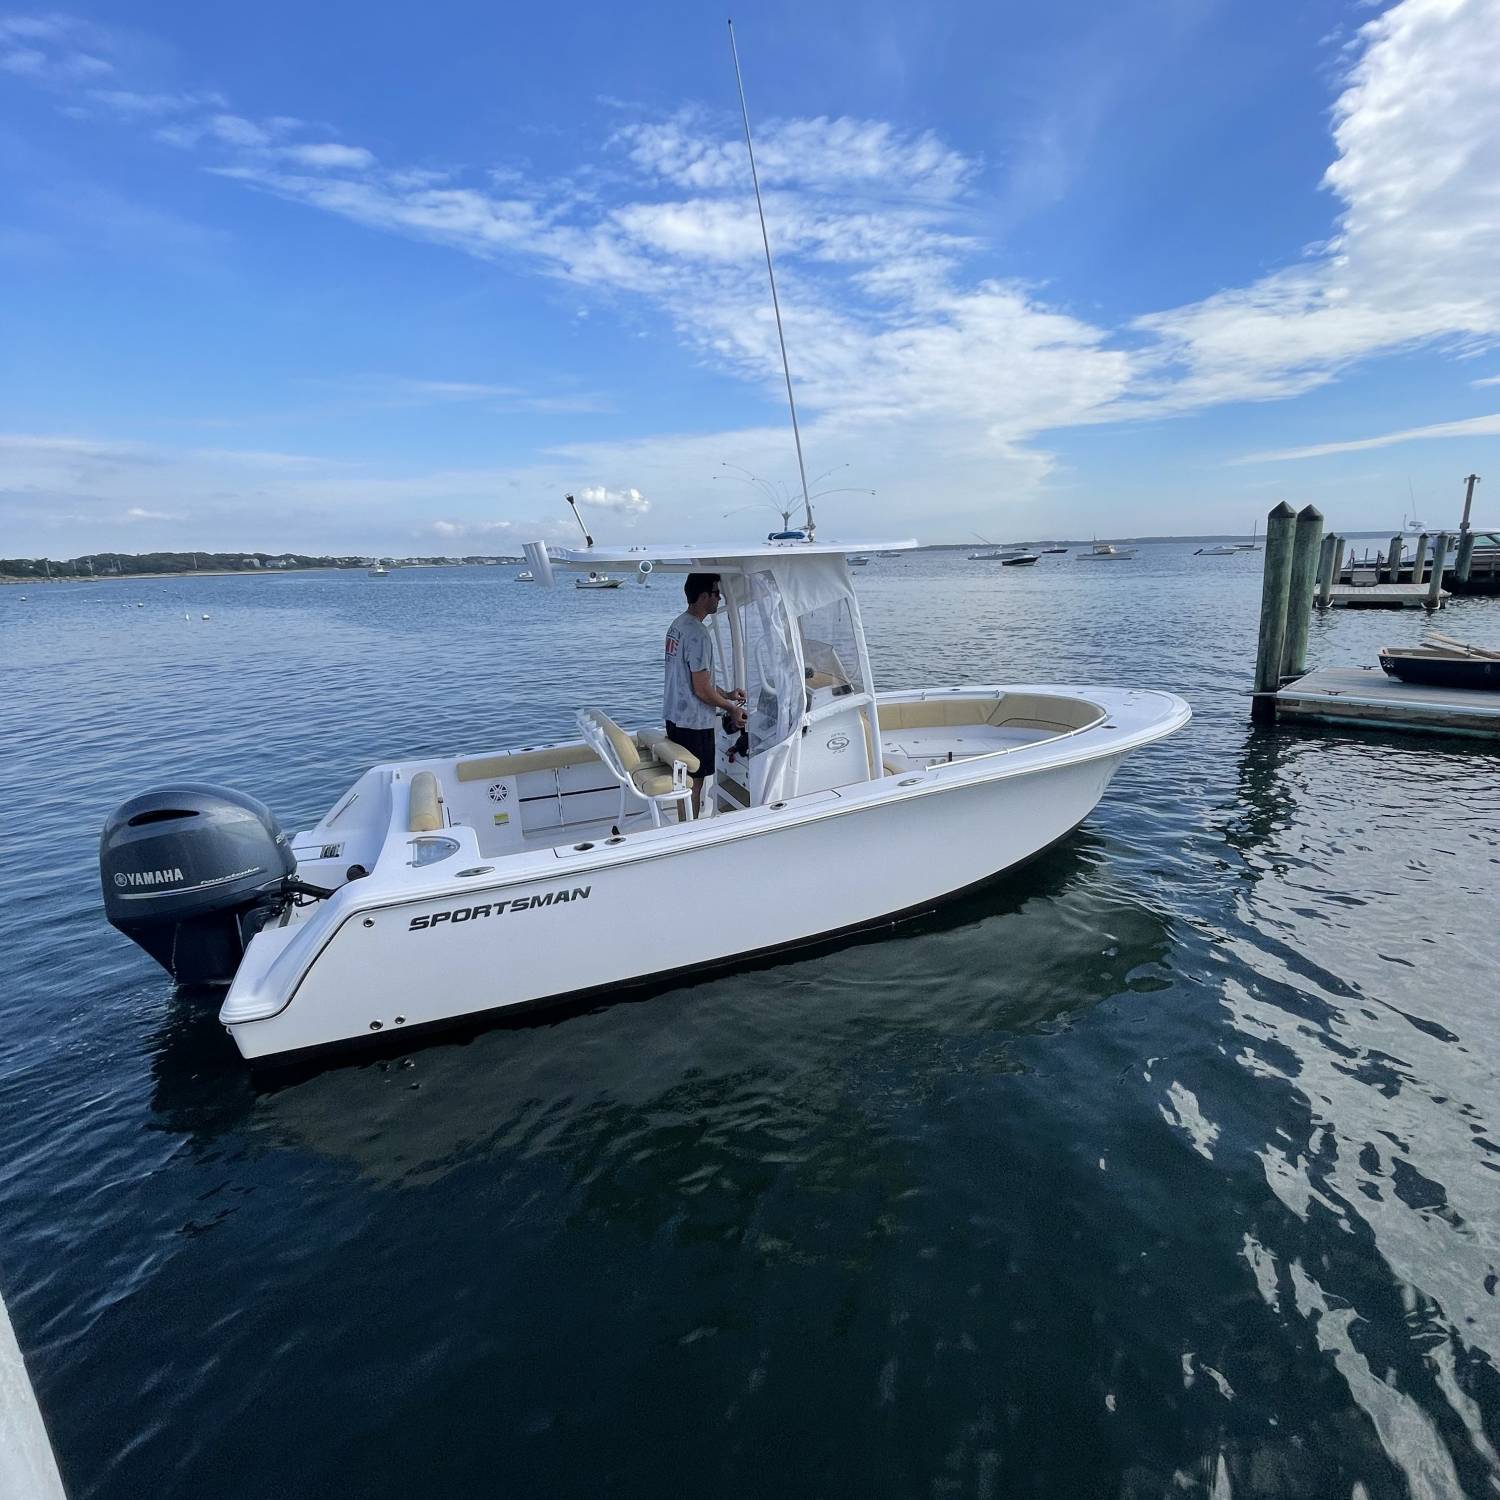 Title: One of the last rides before winter - On board their Sportsman Open 232 Center Console - Location: Cape cod. Participating in the Photo Contest #SportsmanApril